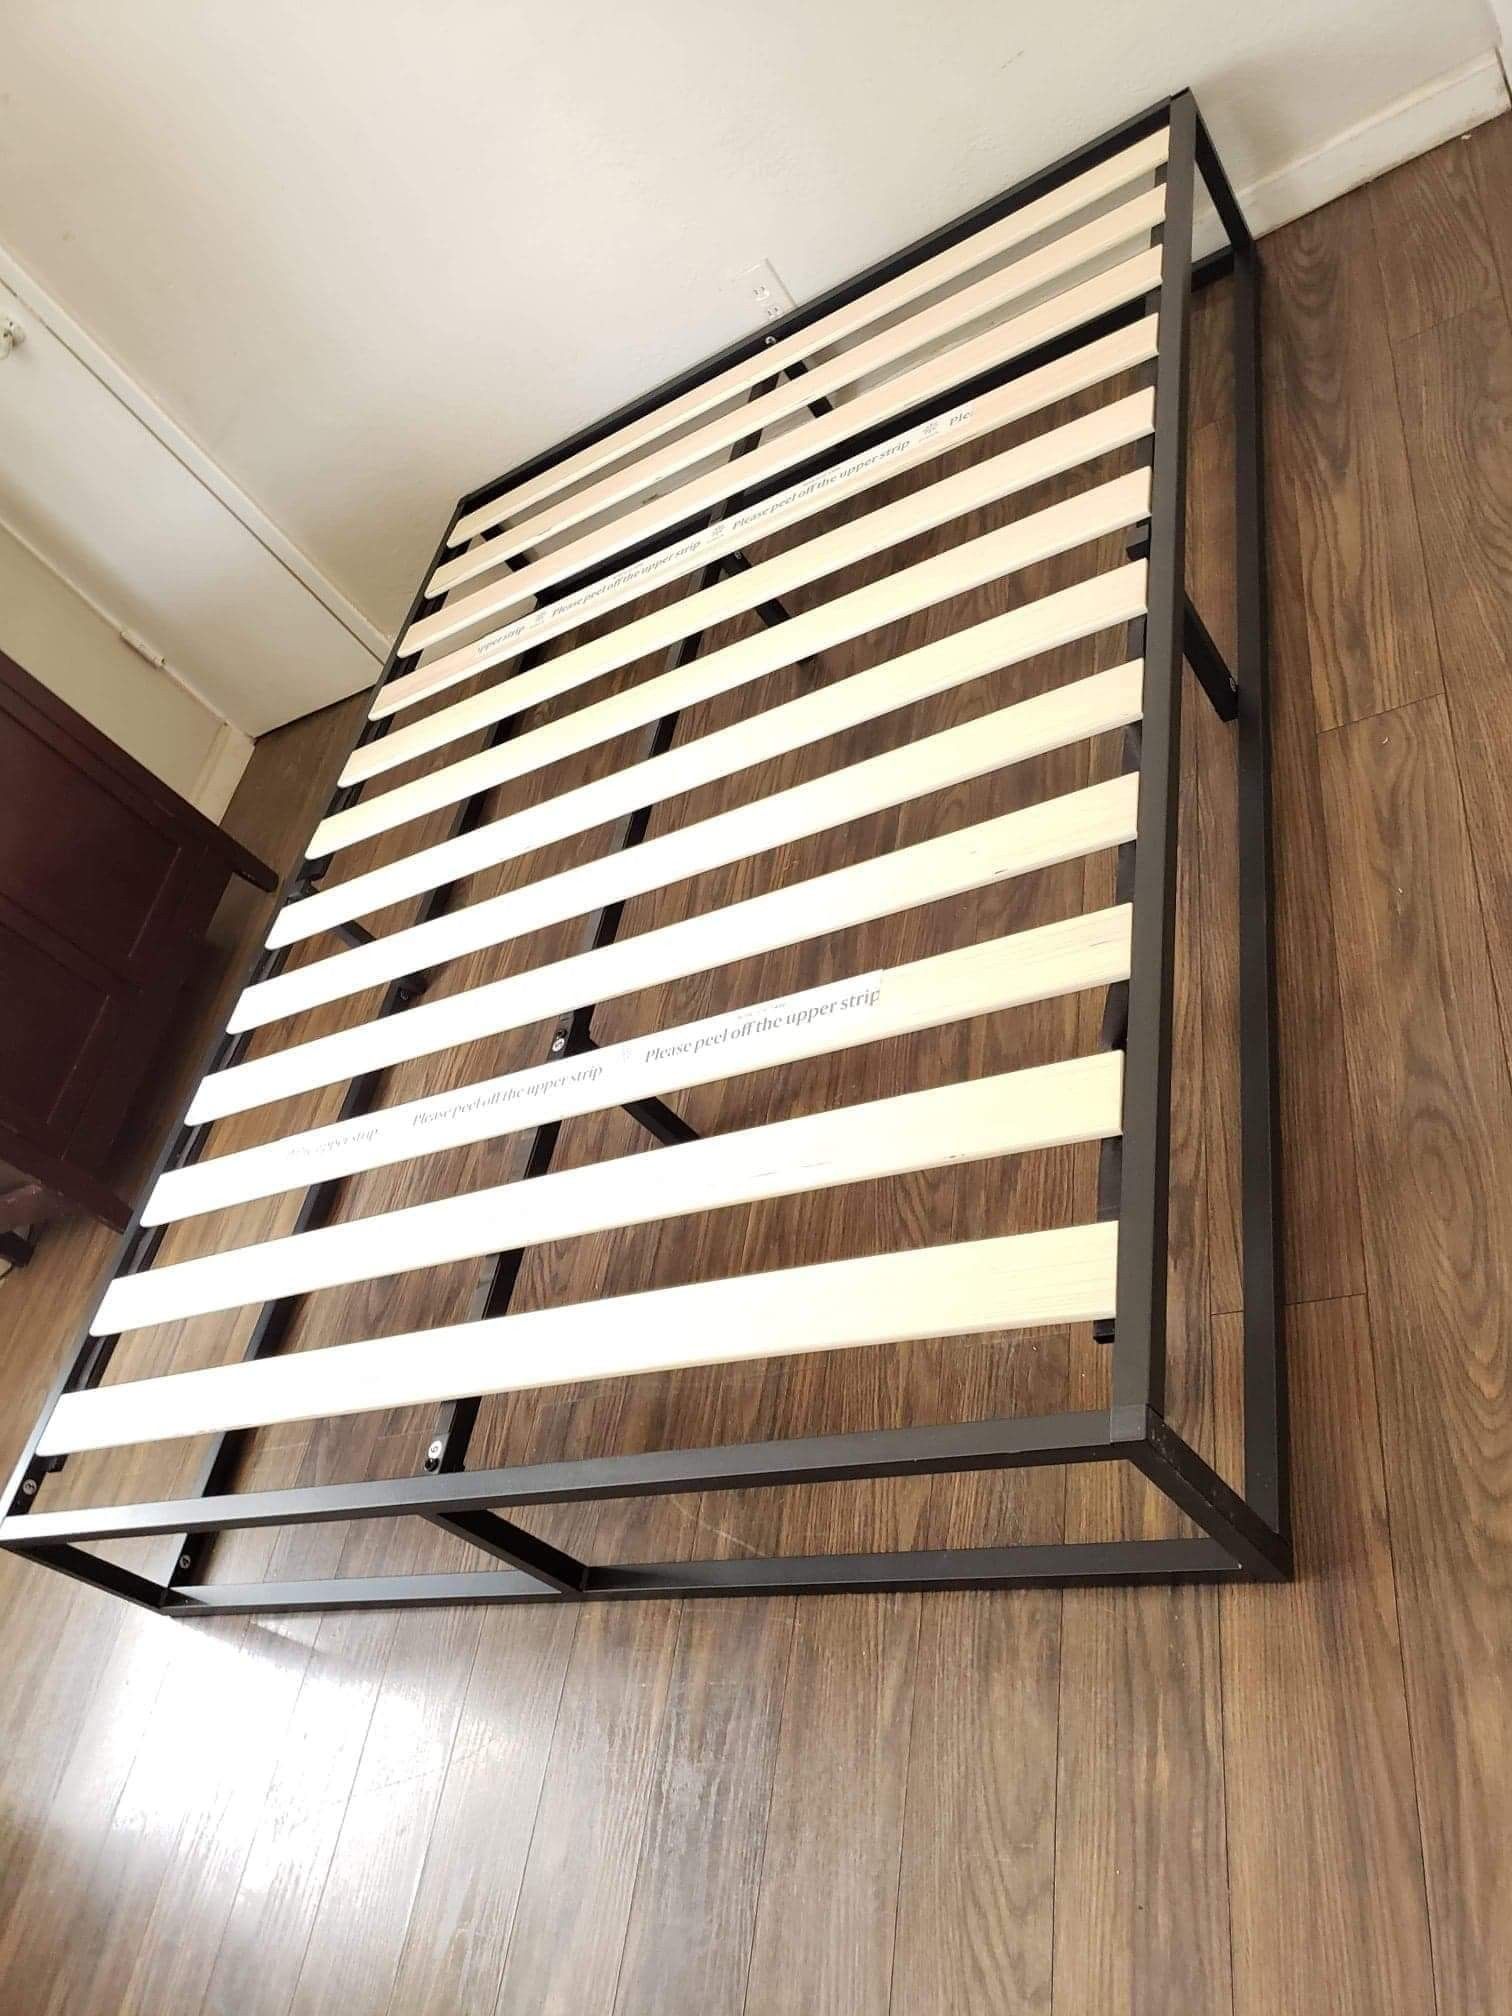 Platform bed frame Full size. Brand new. Free delivery in Modesto. $65